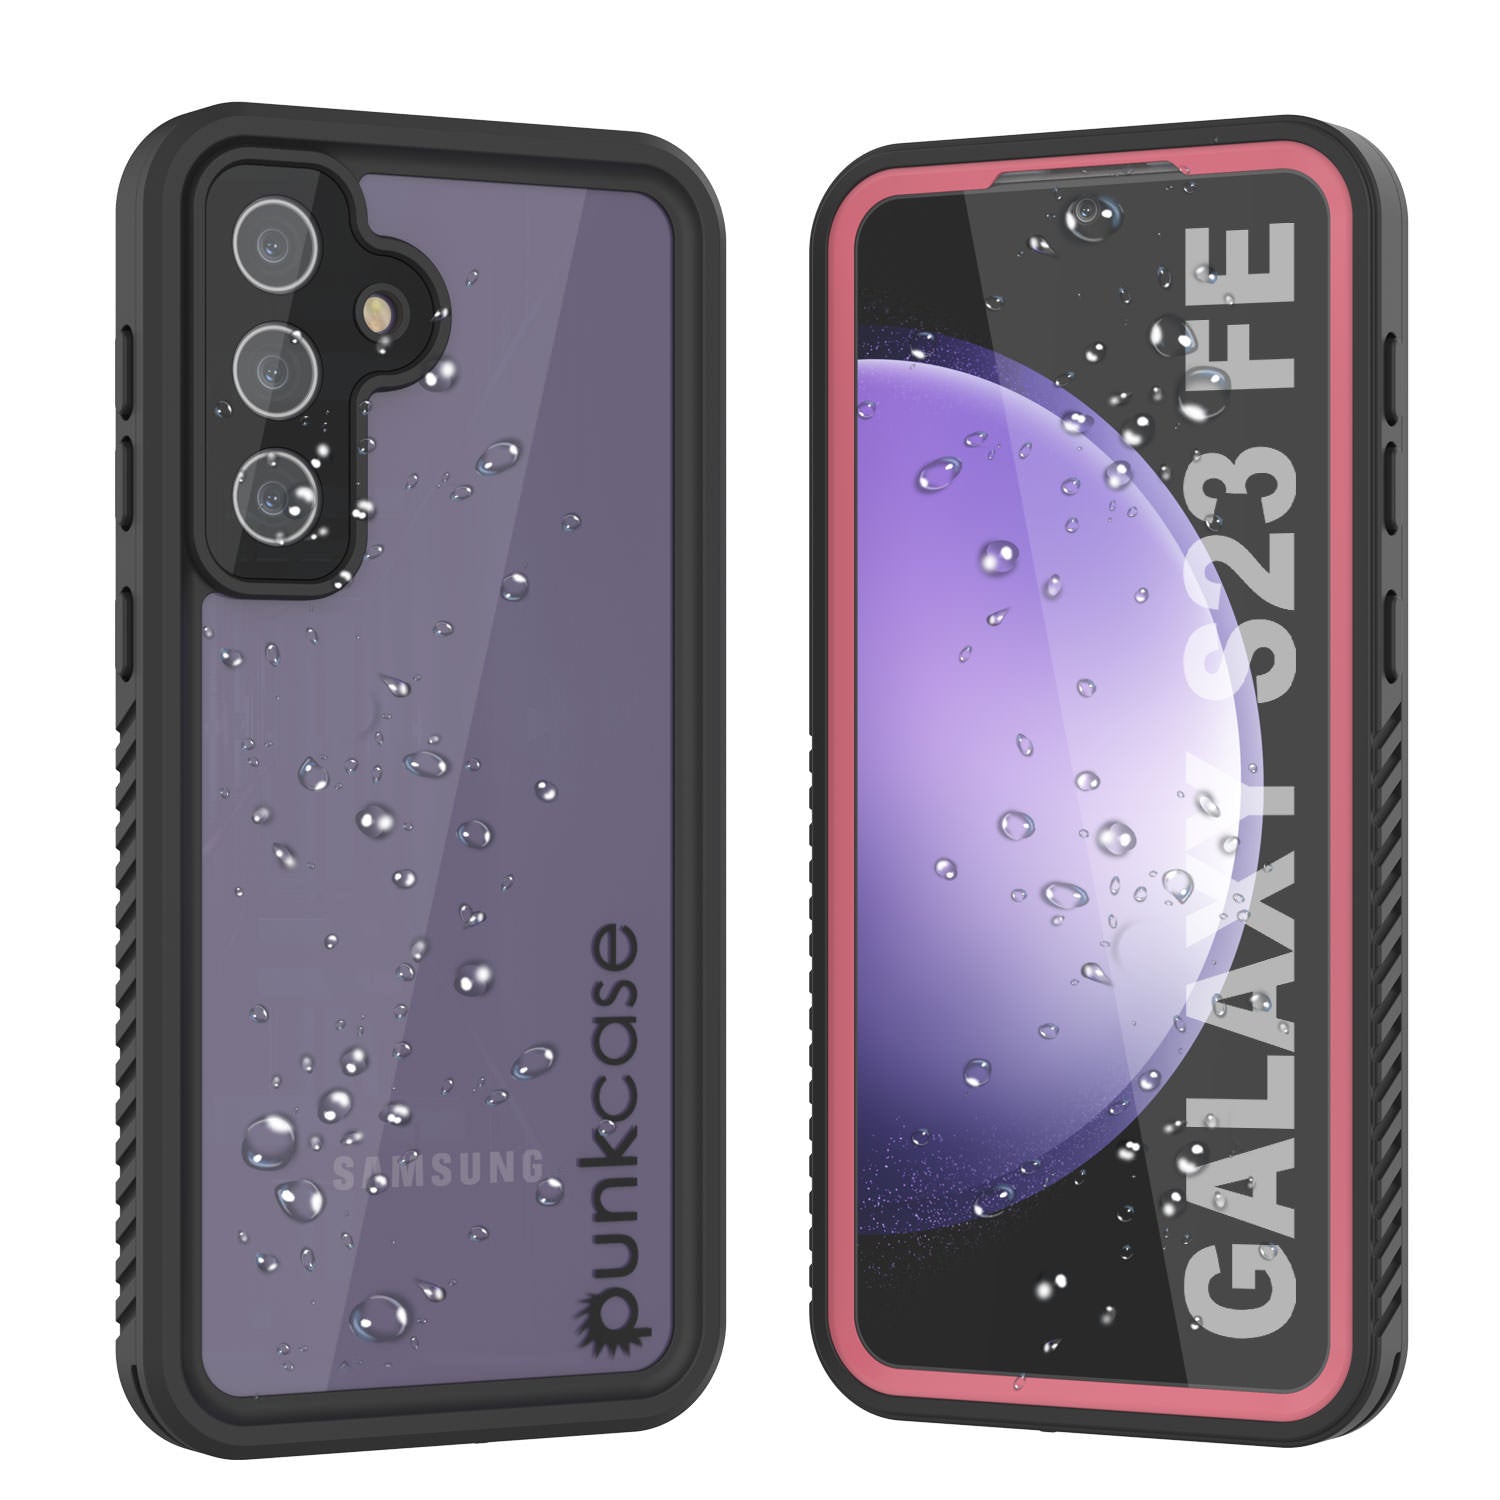 Galaxy S23 FE Water/ Shock/ Snowproof [Extreme Series] Slim Screen Protector Case [Pink]